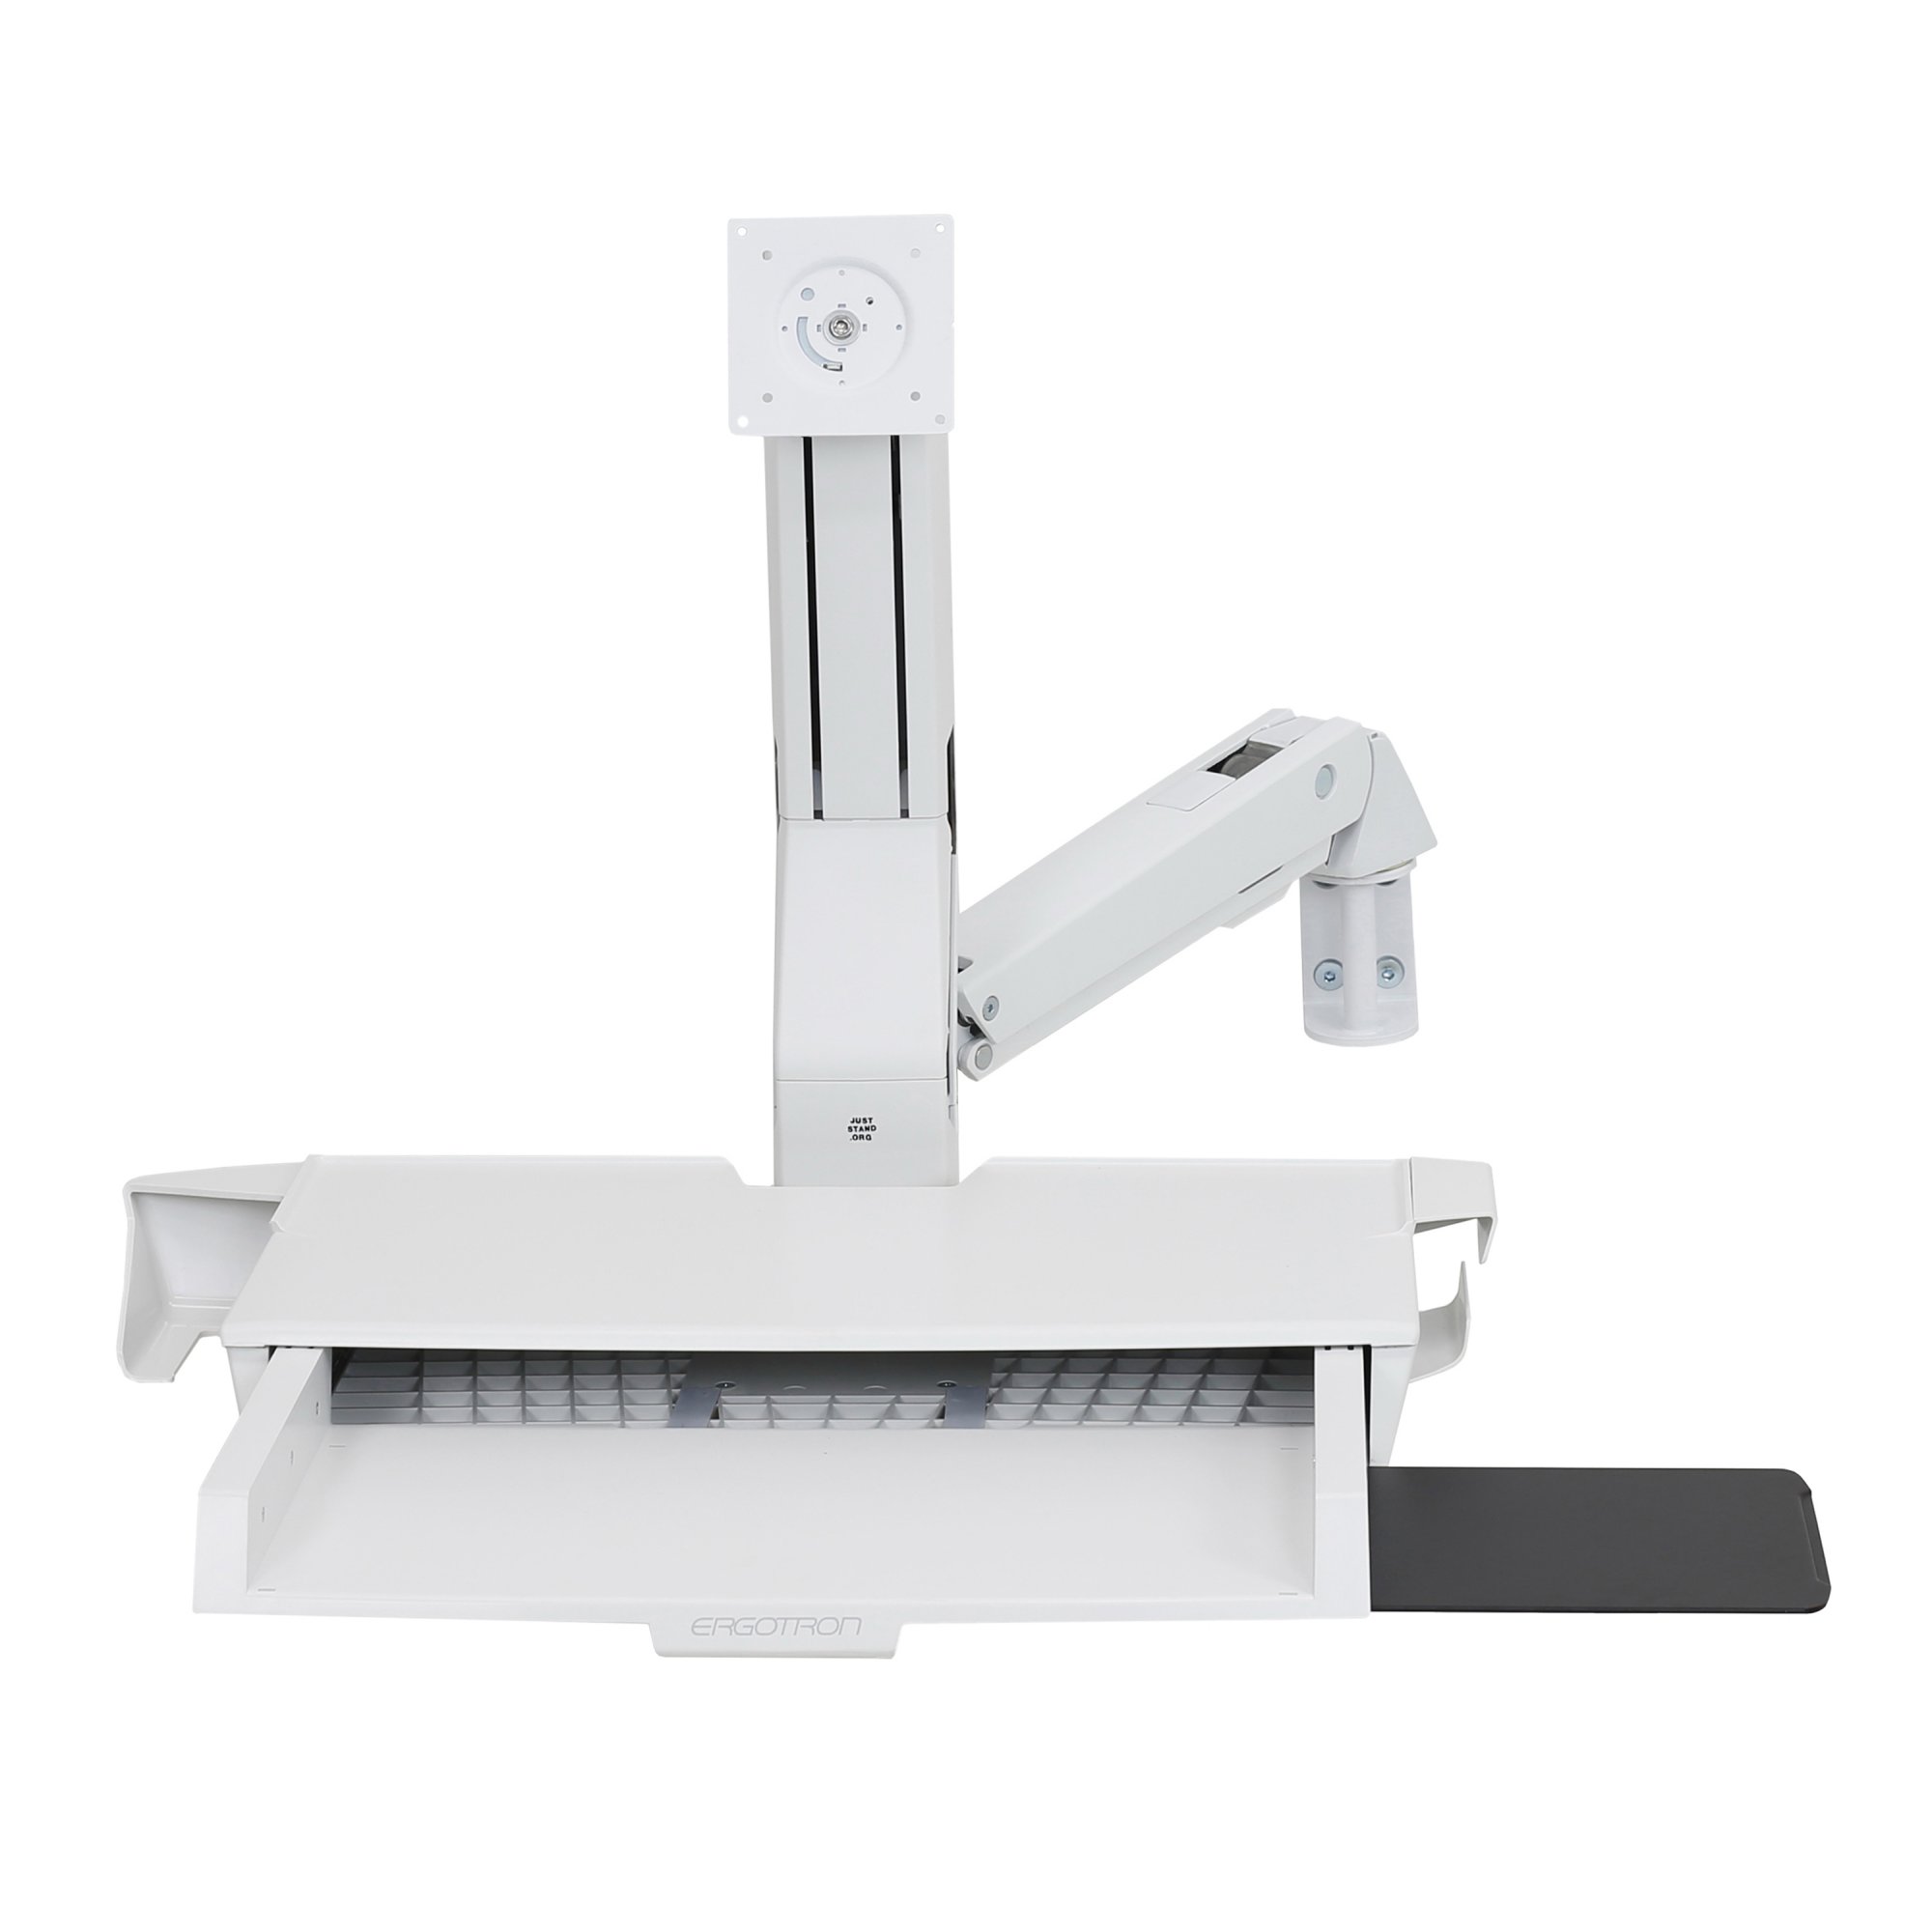 Ergotron 45-260-216 Sit-Stand Combo Arm with Worksurface (white)